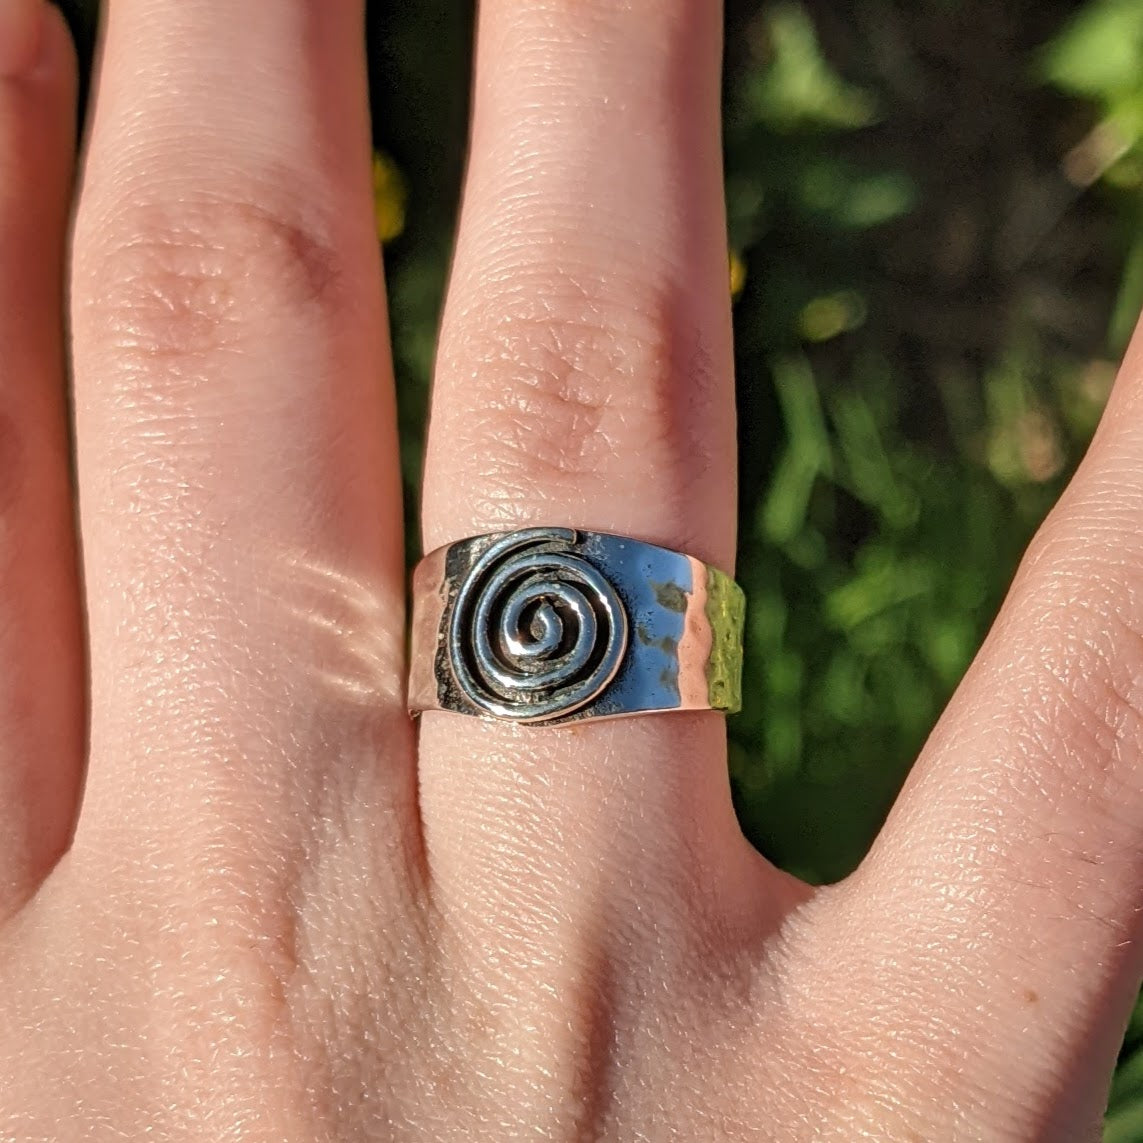 Amazon.com: Spiral Eye Wave Good Luck Boho Chic Ring New 925 Sterling Silver  Band Size 5: Clothing, Shoes & Jewelry